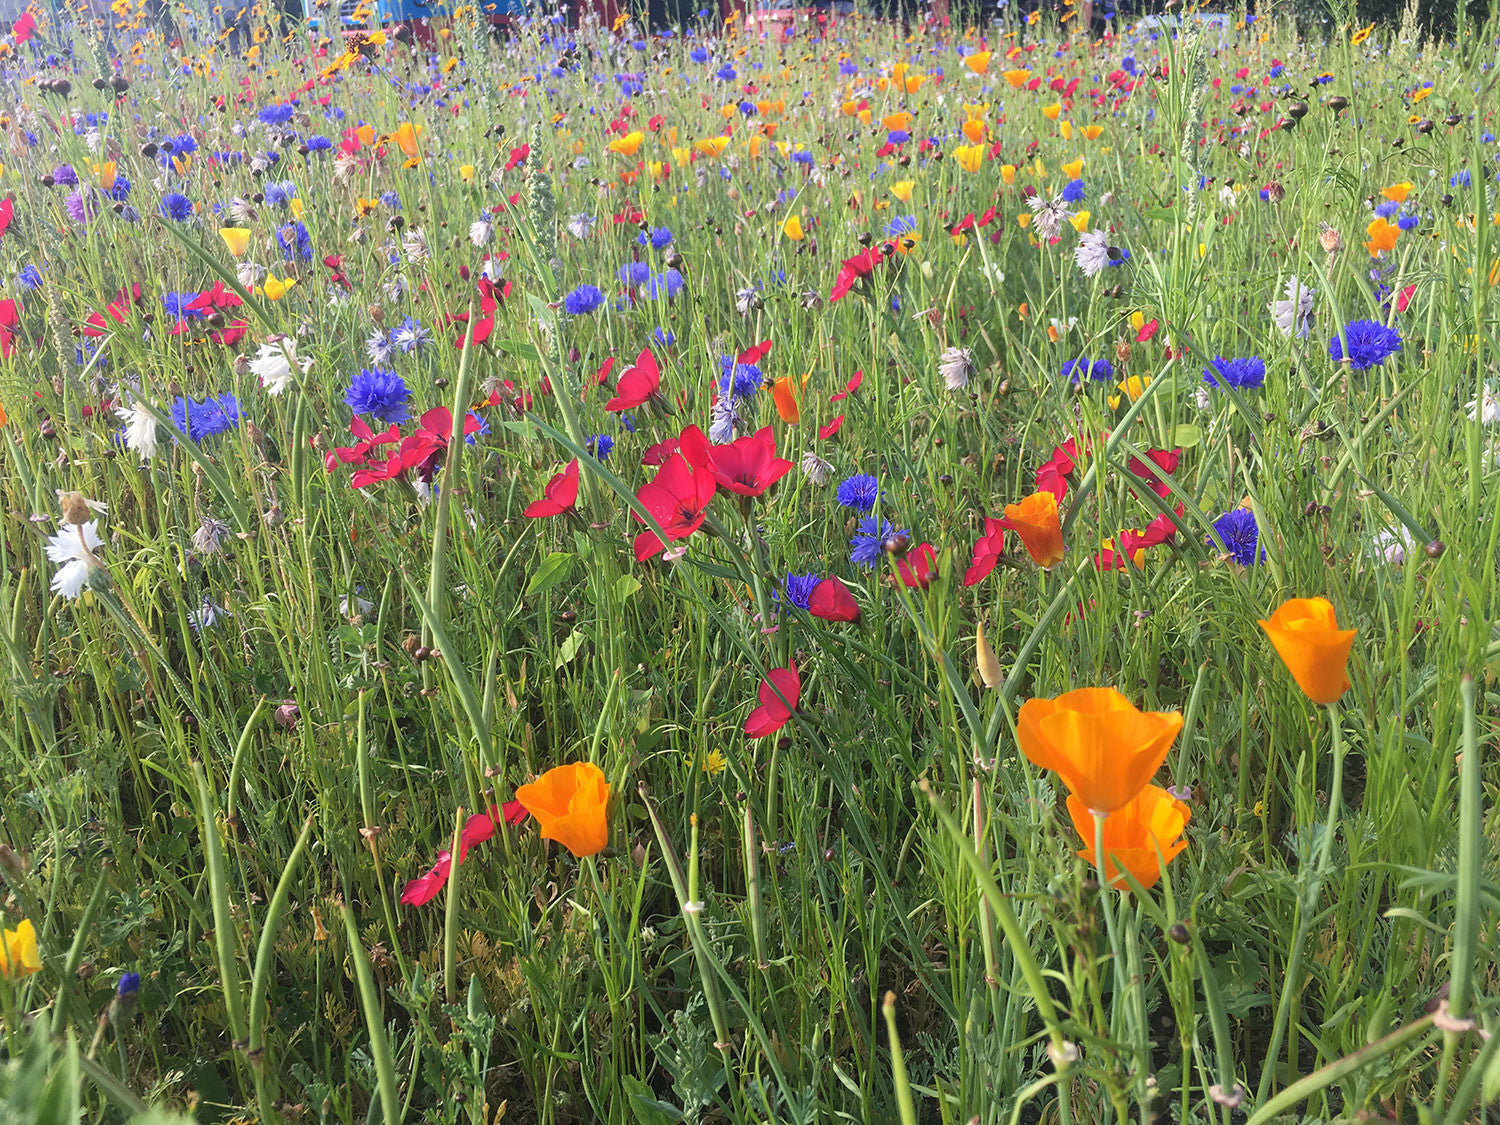 Over the past two years a number of wildflower areas have been created - this one next to a busy tyre fitter!